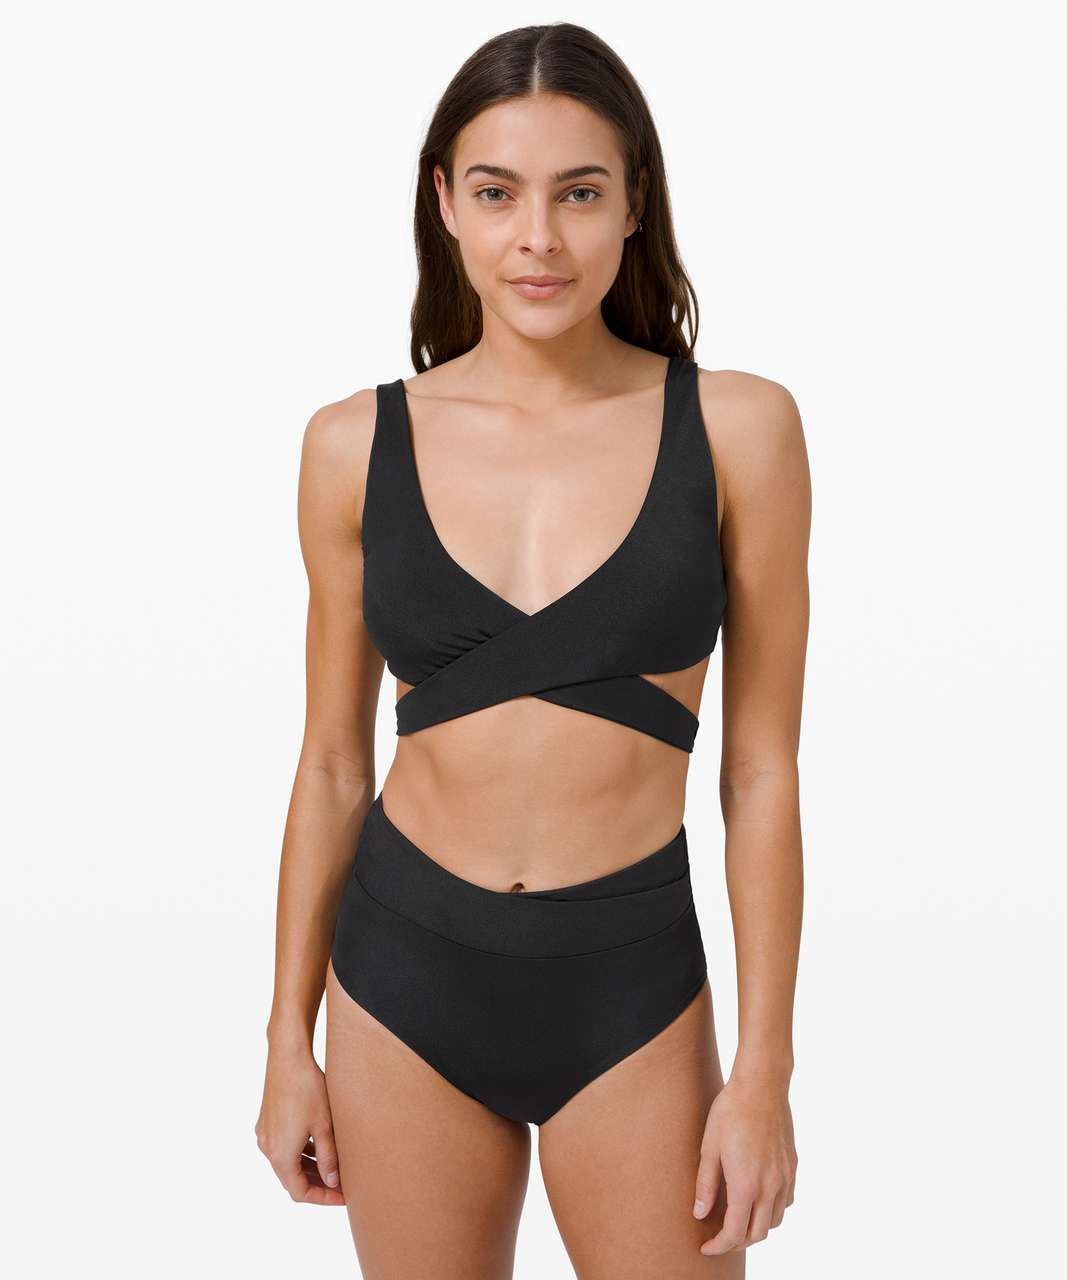 Lululemon All that Glimmers Wrap Top - Black